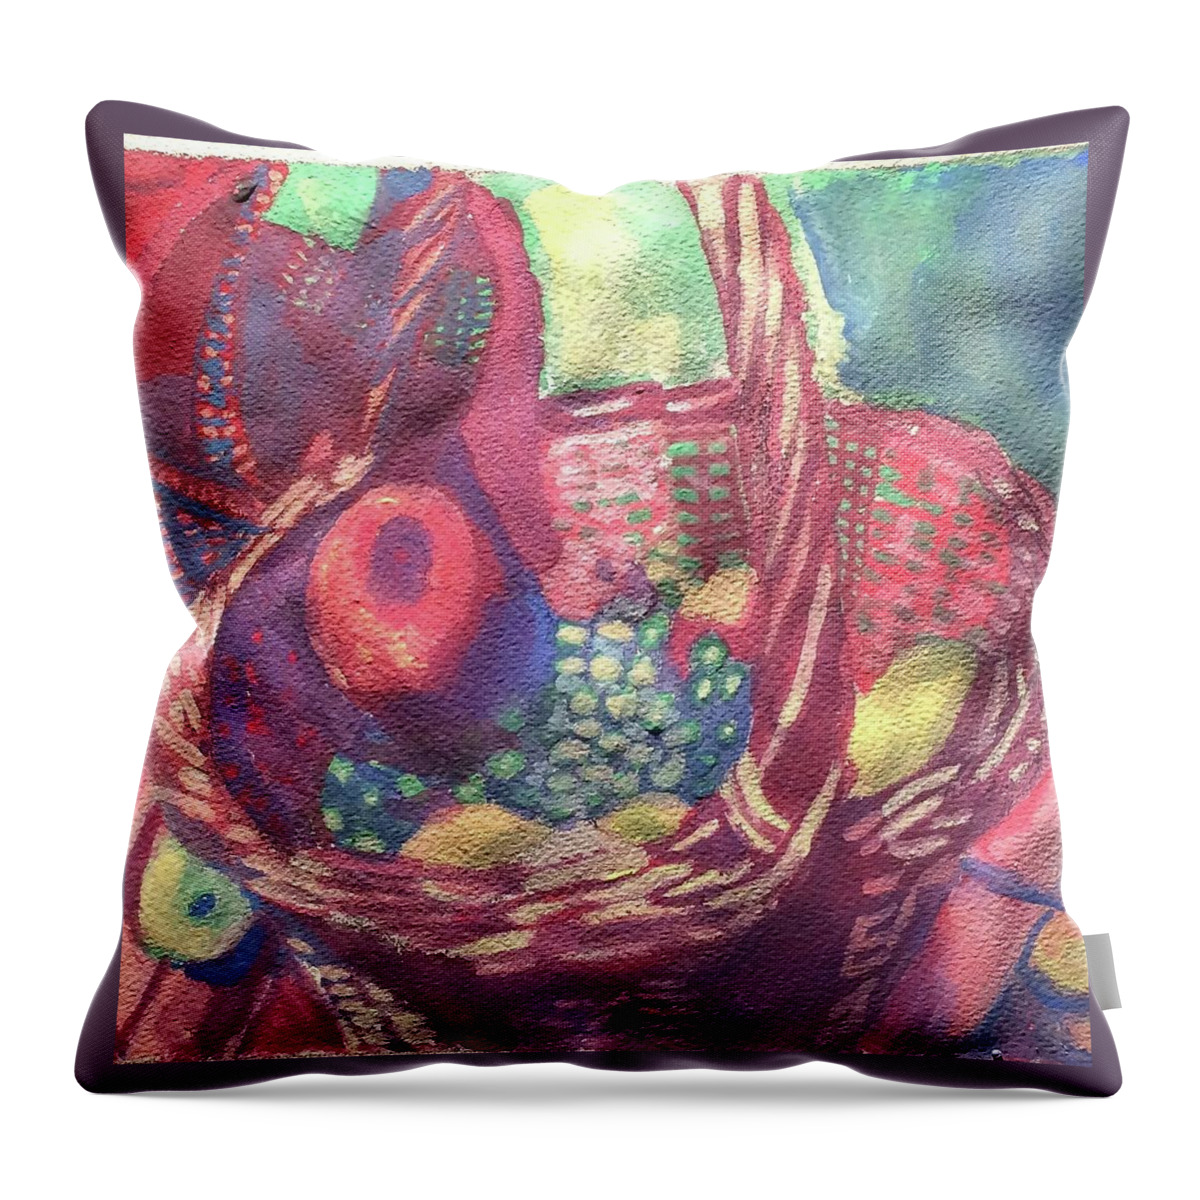 Still Life Throw Pillow featuring the painting Just Gathered by Enrique Ojembarrena